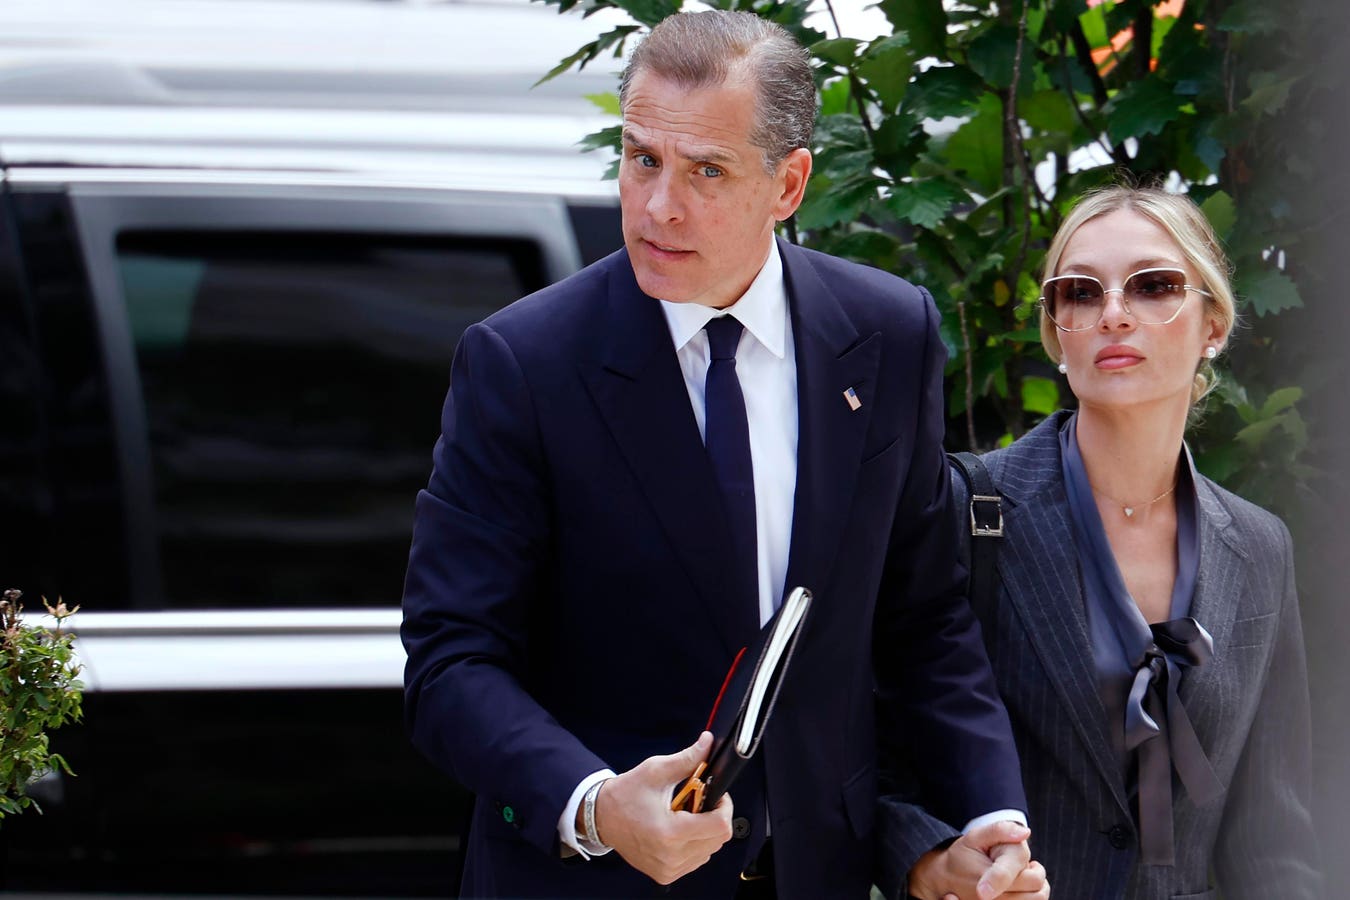 Hunter Biden Arrives In Court For His Gun Trial—Here's What To Know